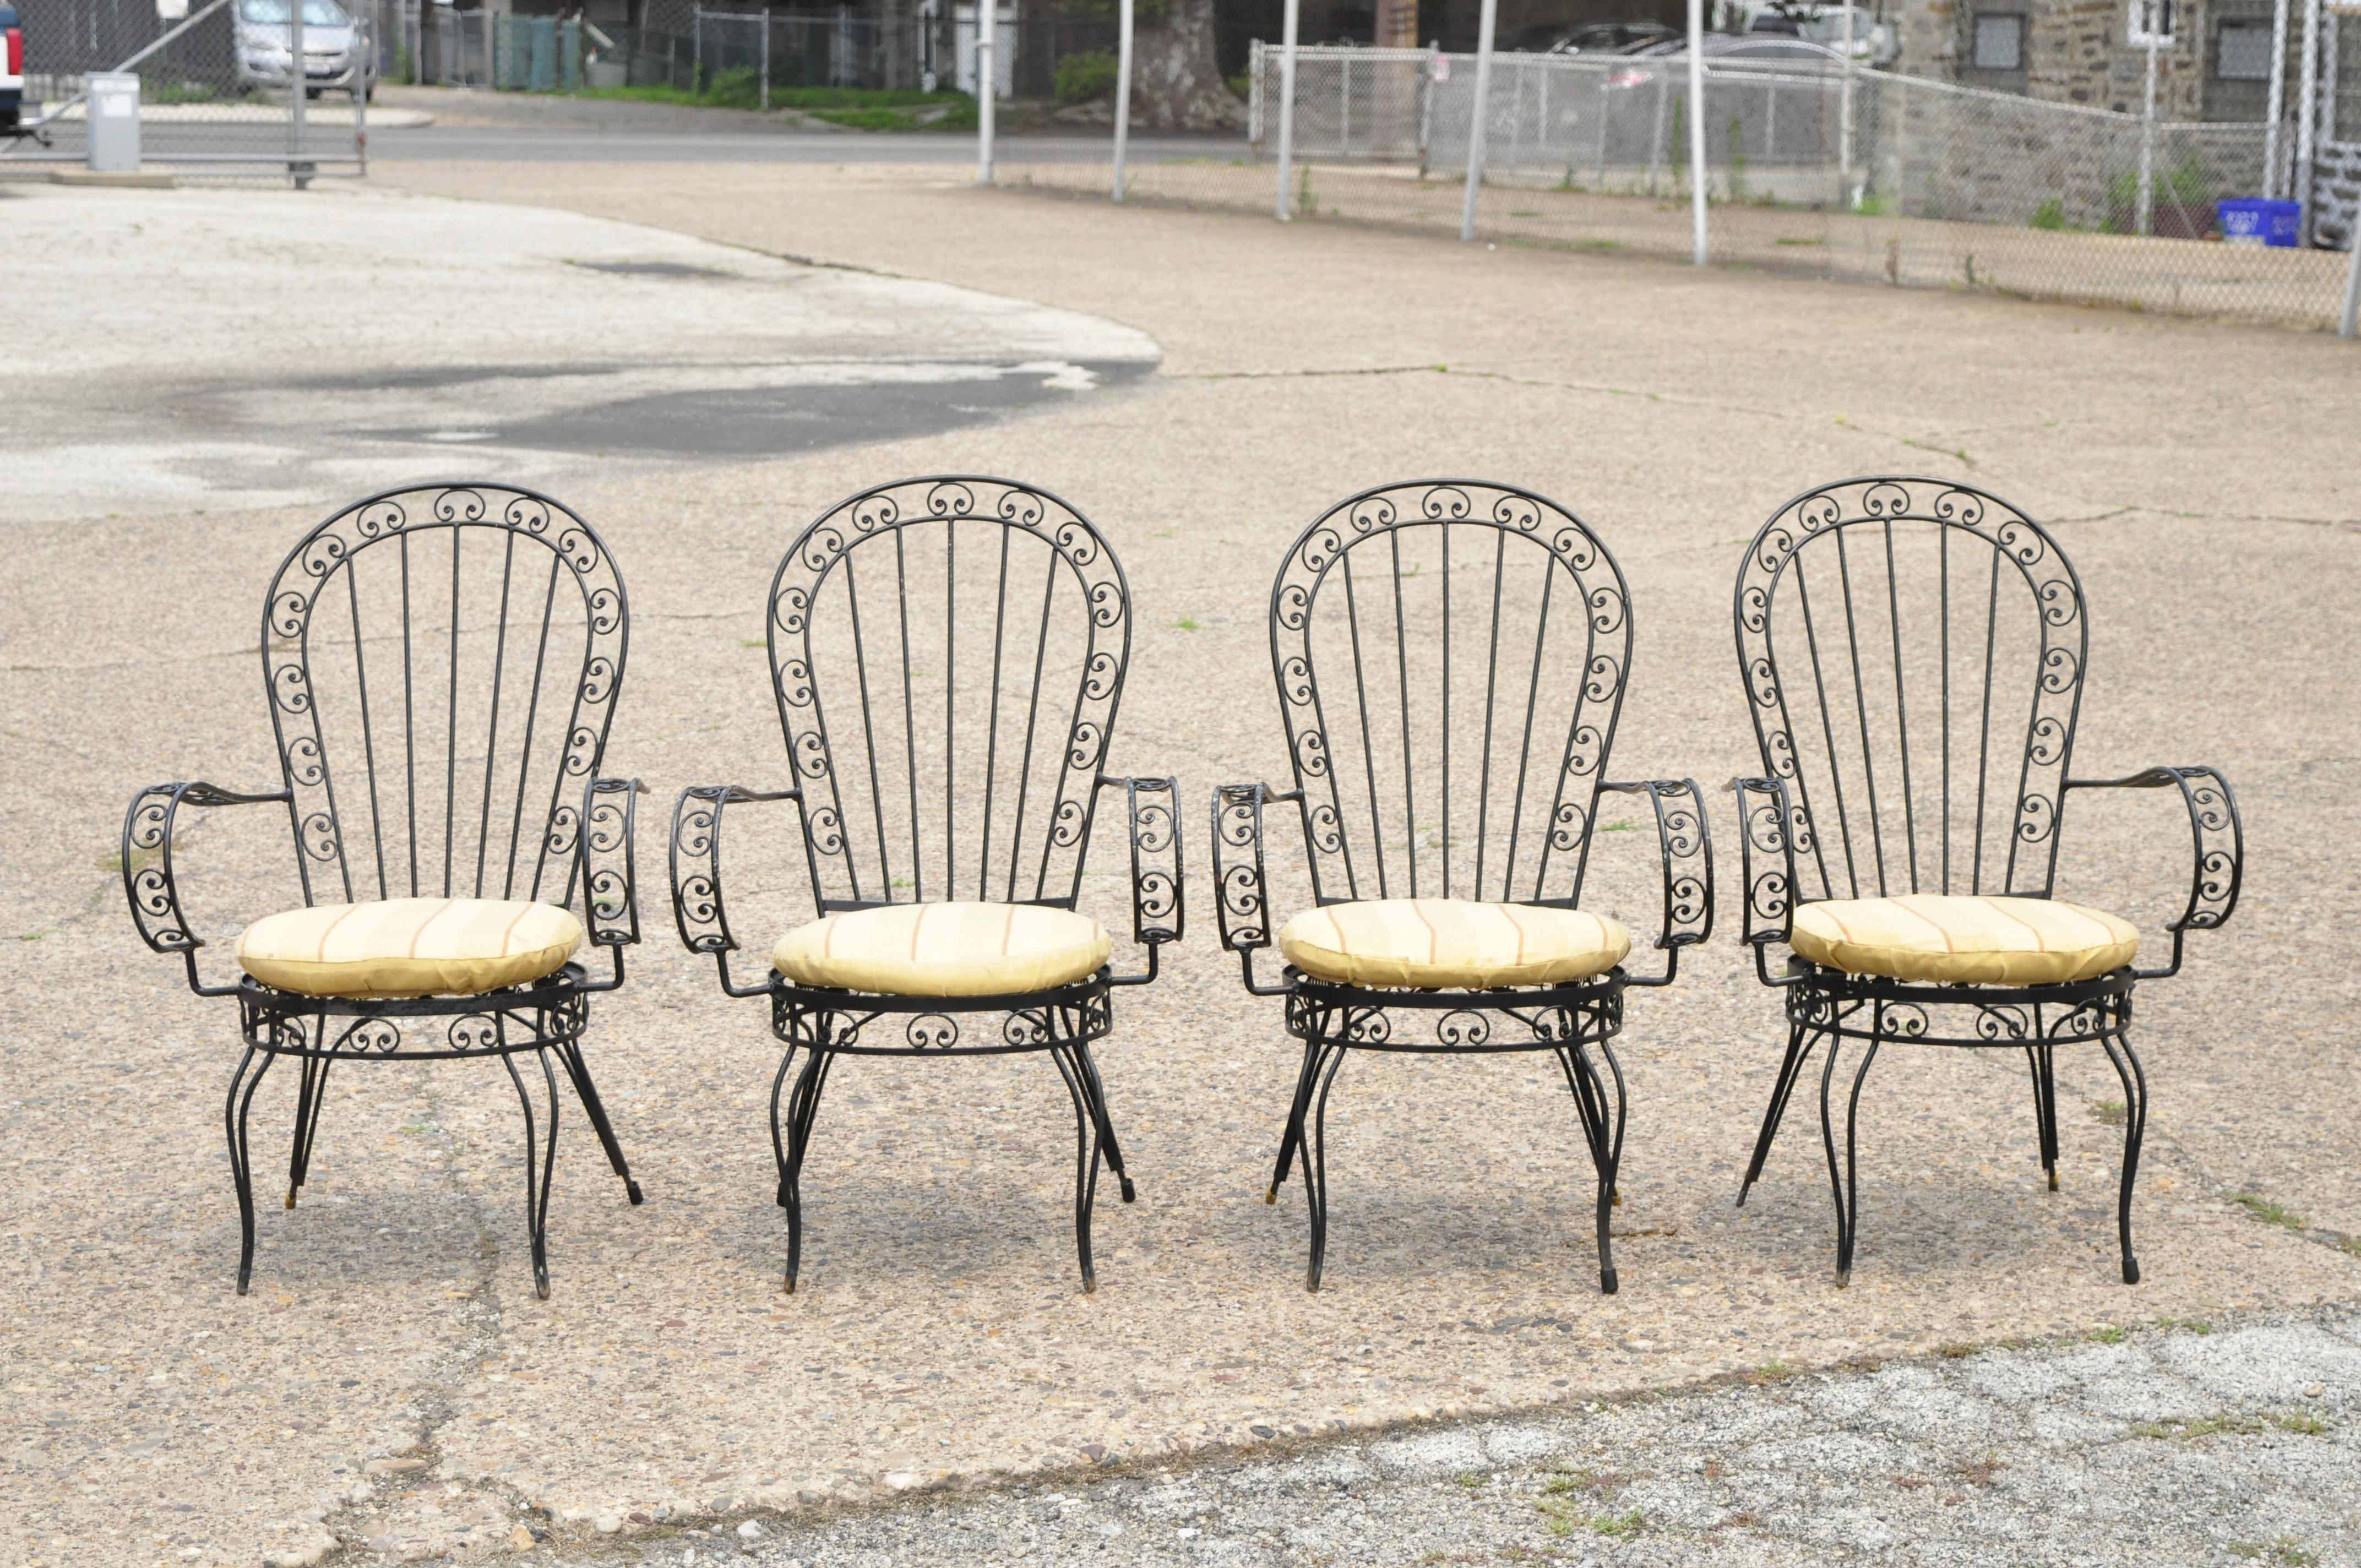 Vintage Italian Regency Wrought Iron Fan Back Sunroom Dining Chairs - Set of 4 For Sale 4